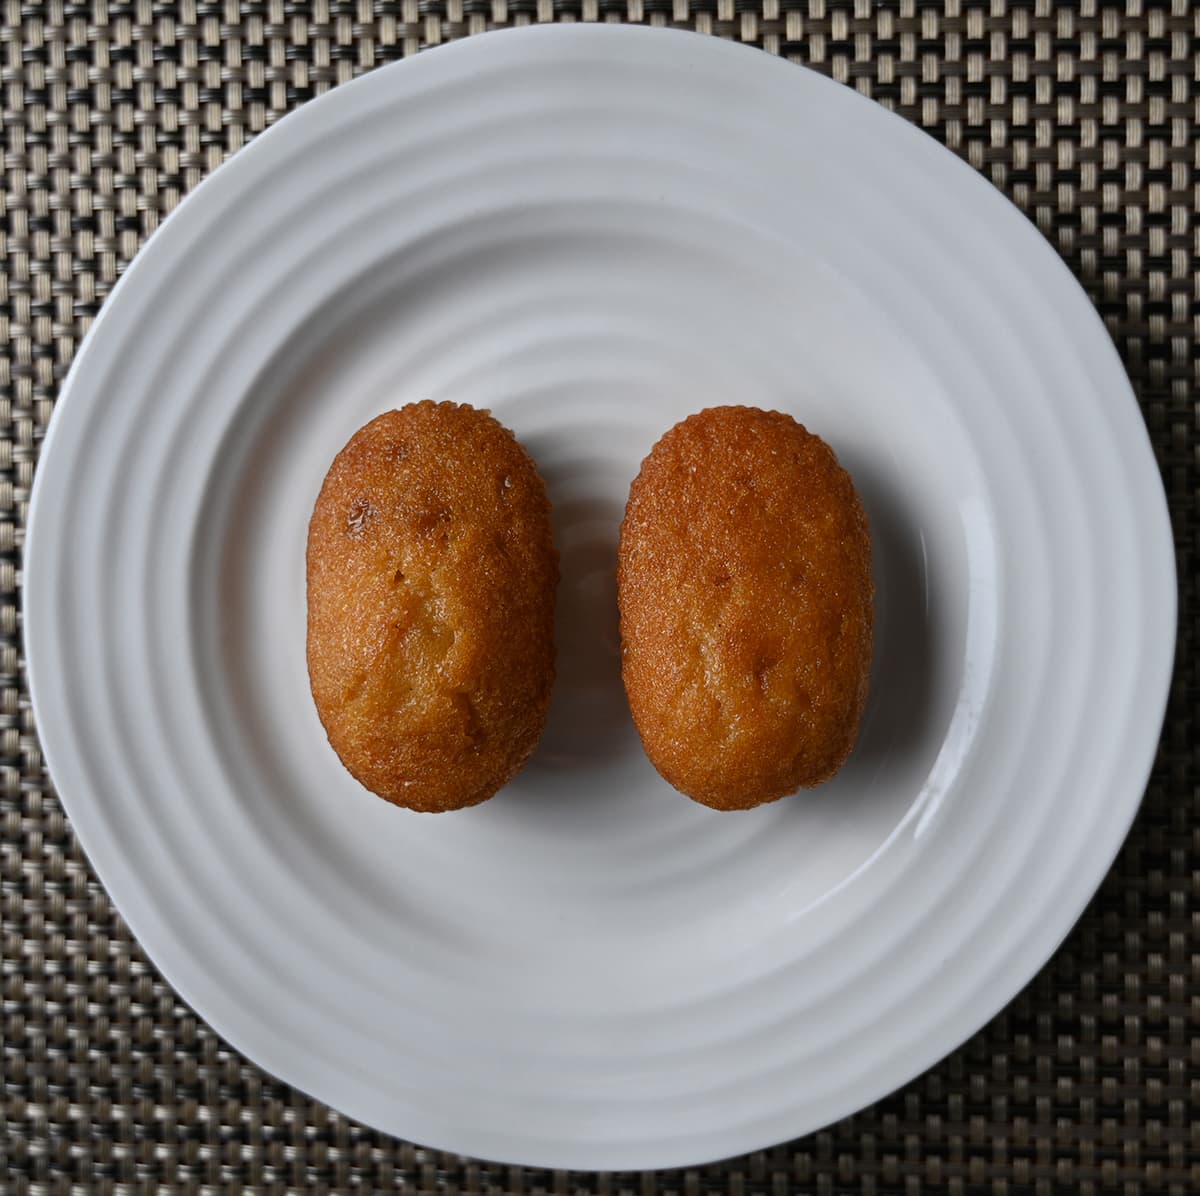 Top down image of two muffin bites unwrapped and served on a white plate.